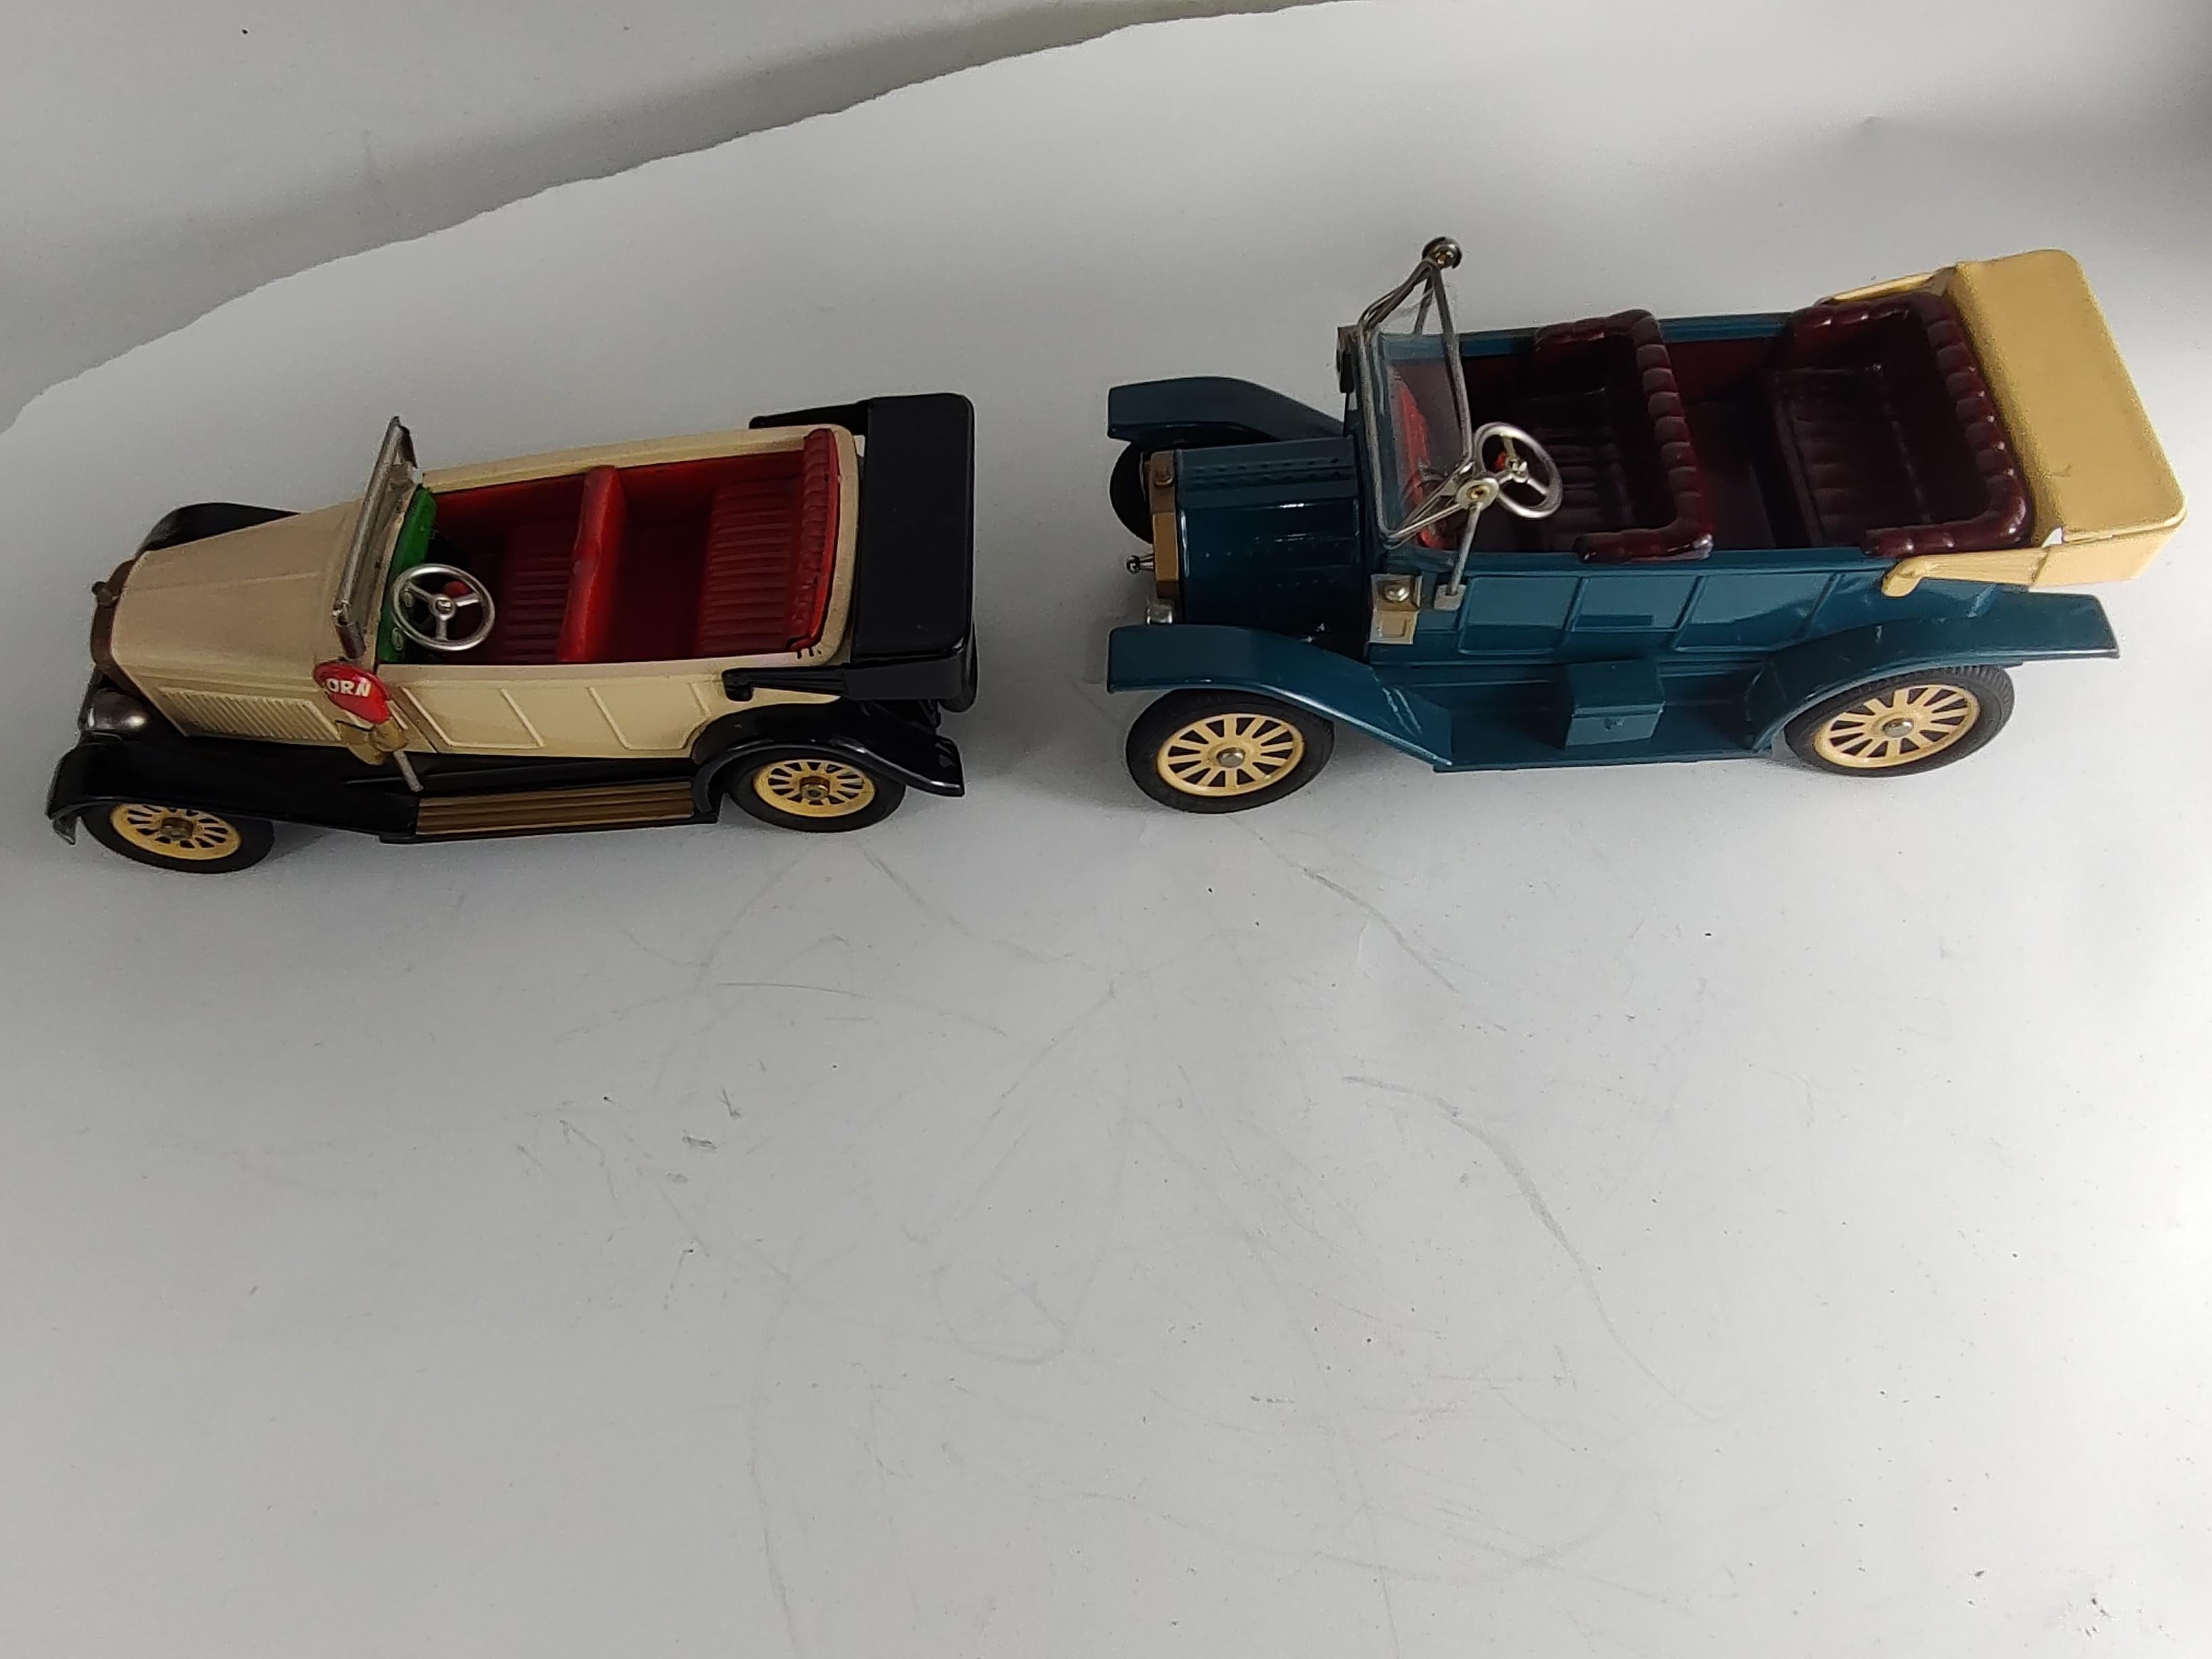 Mid Century Japanese Tin Litho Toy Car Replicas Fords 1908 & 1925 Touring Cars In Good Condition For Sale In Port Jervis, NY